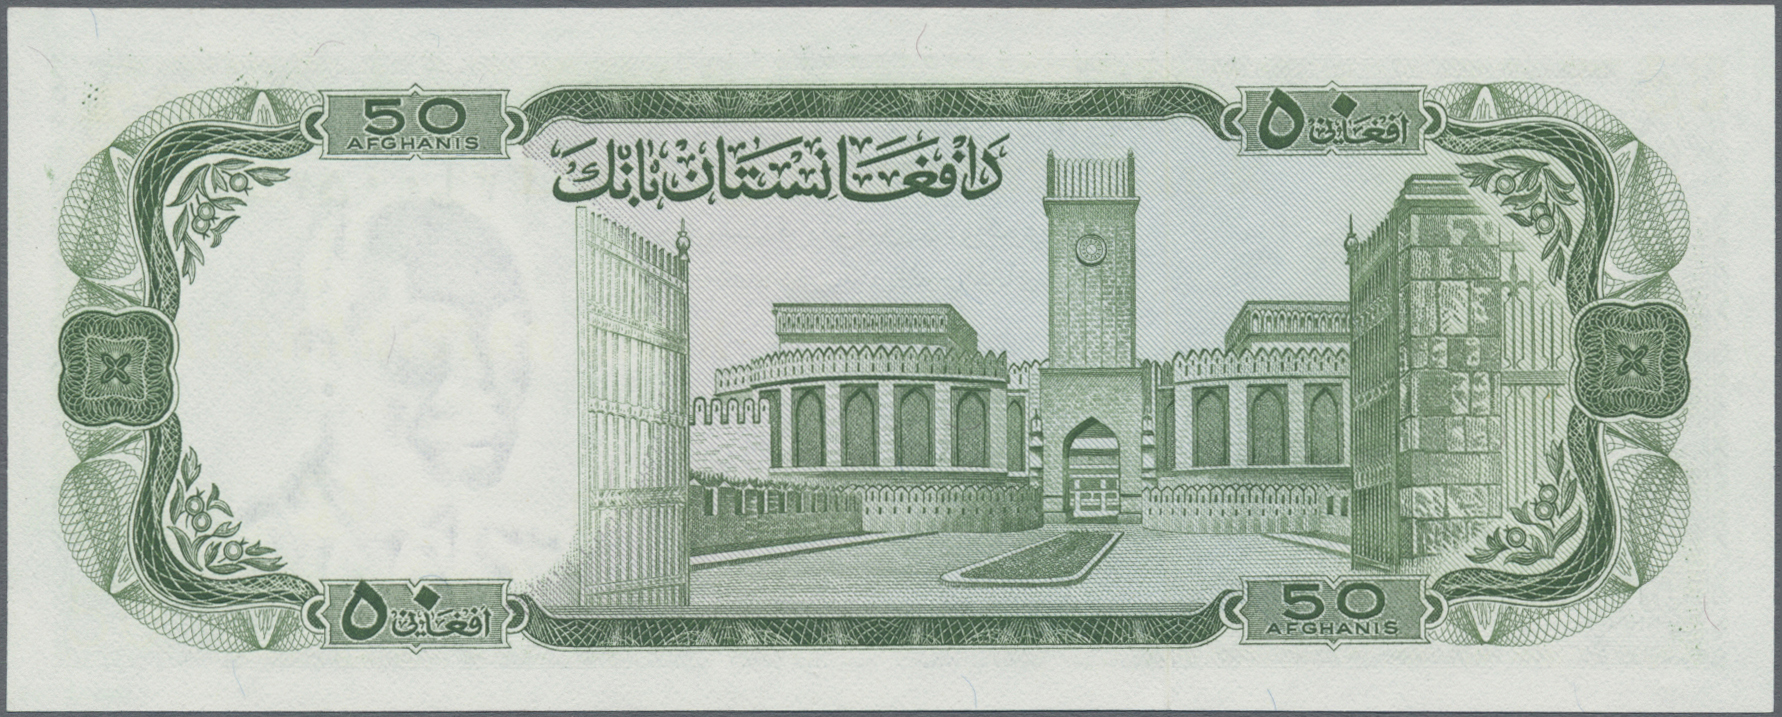 Lot 00005 - Afghanistan | Banknoten  -  Auktionshaus Christoph Gärtner GmbH & Co. KG 55th AUCTION - Day 1